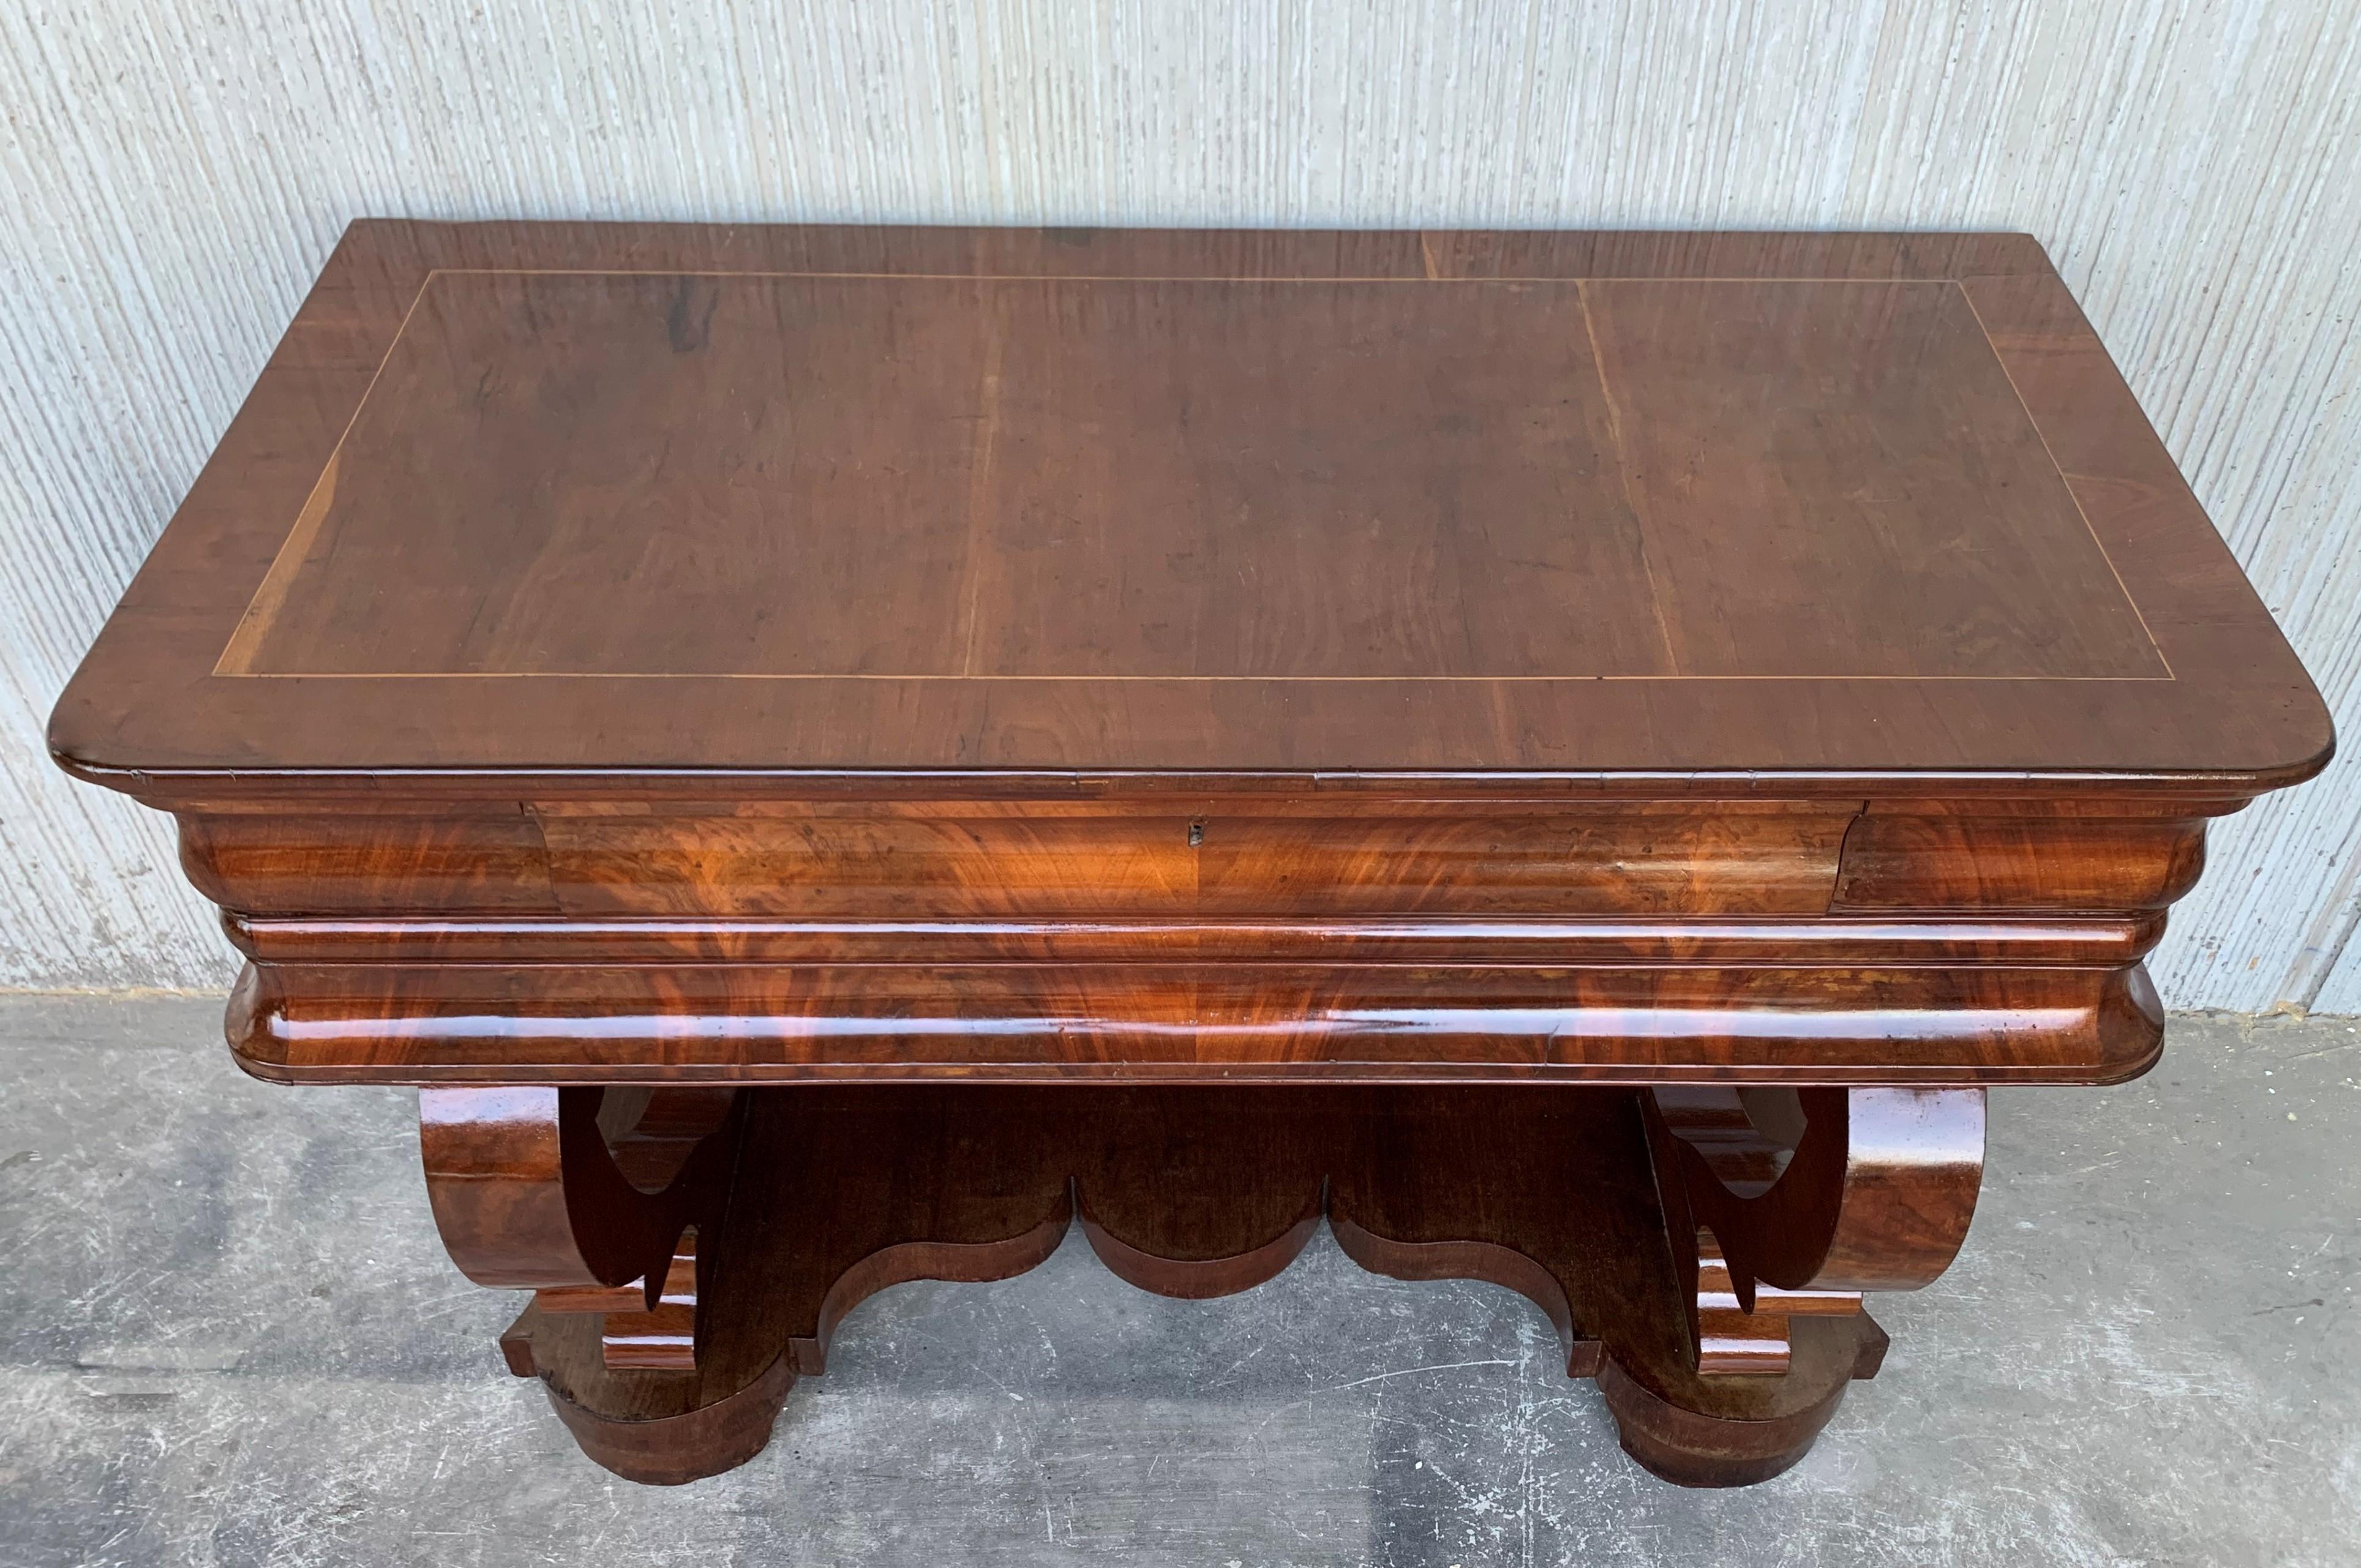 Early Biedermeier Period Walnut Console Table with Drawer, Austria, circa 1830 For Sale 3